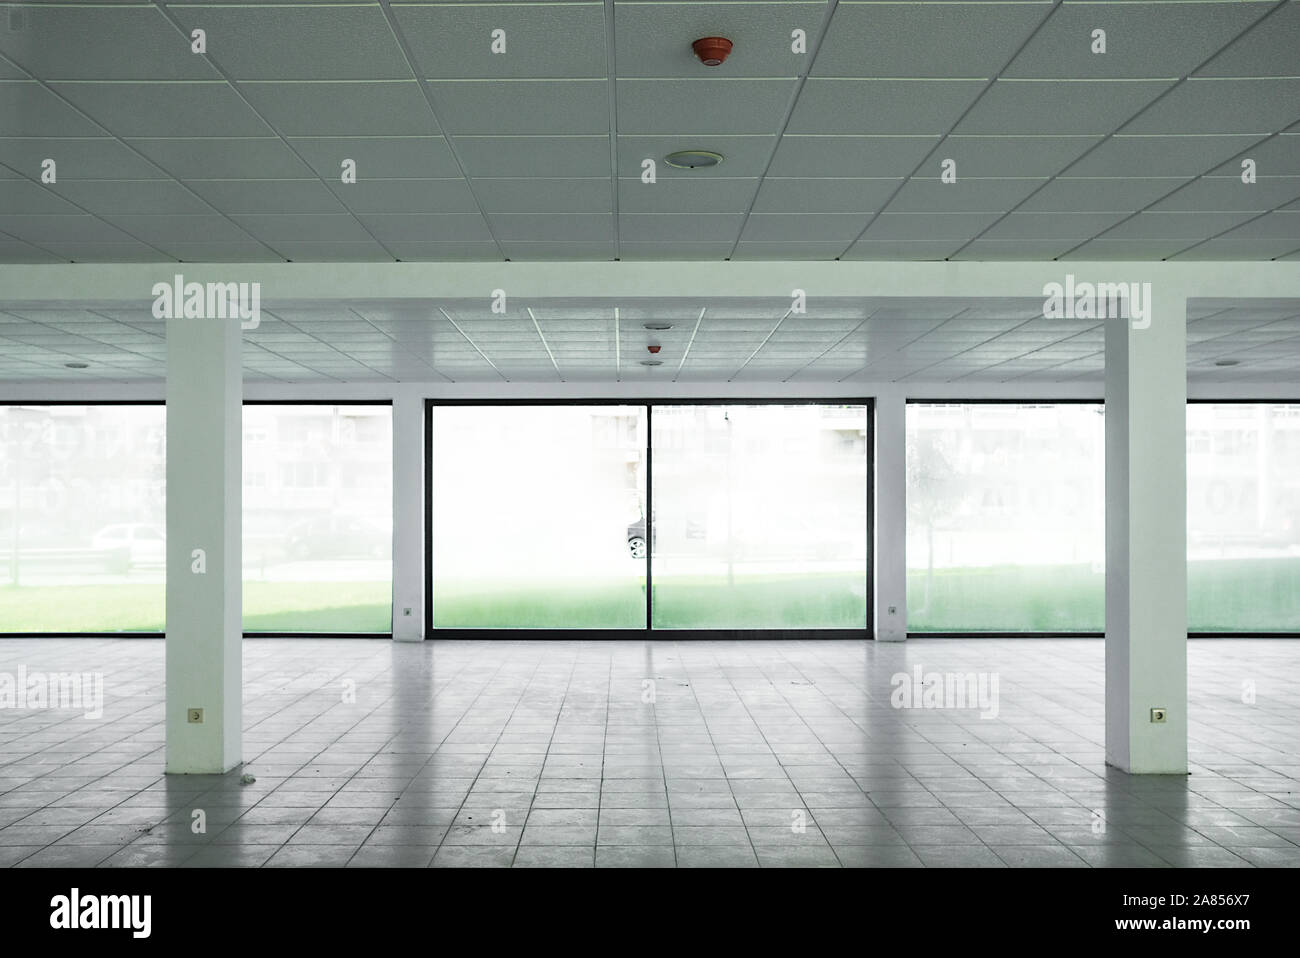 empty indoor spaces transming loneliness and emptiness we experience in the urban  scene. Stock Photo